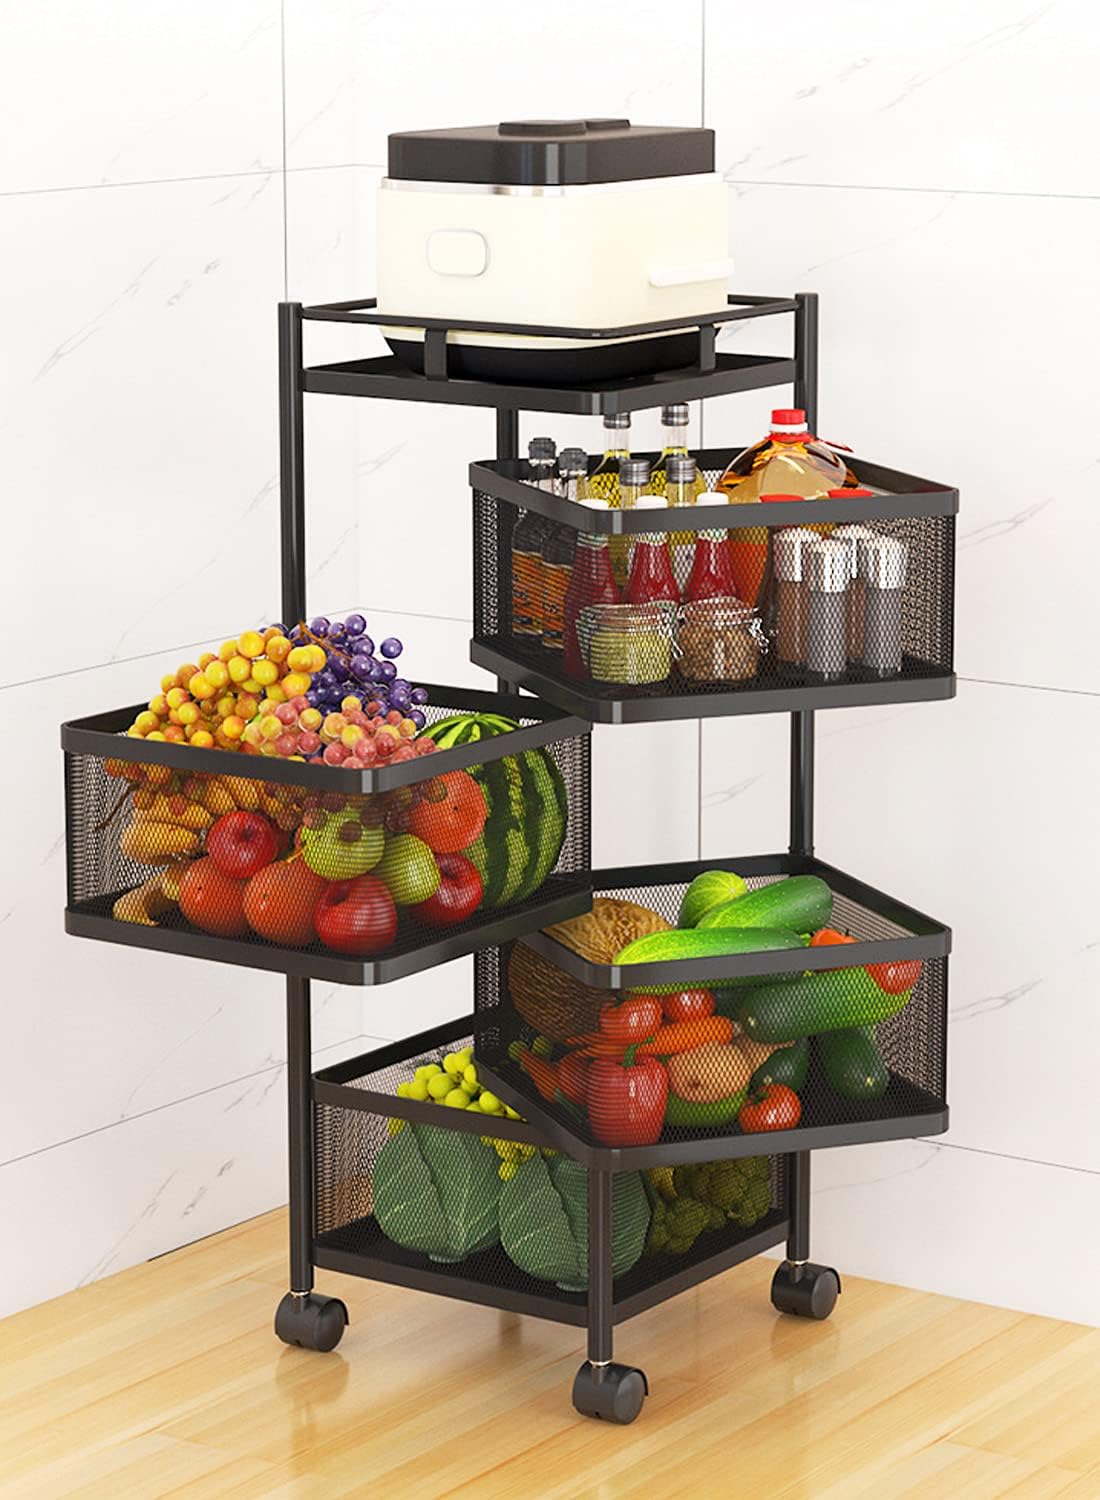 4-Tier Kitchen Storage Organize, Vegetable Fruit Basket for Kitchen, Rotatable Cart with Wheels Pantry